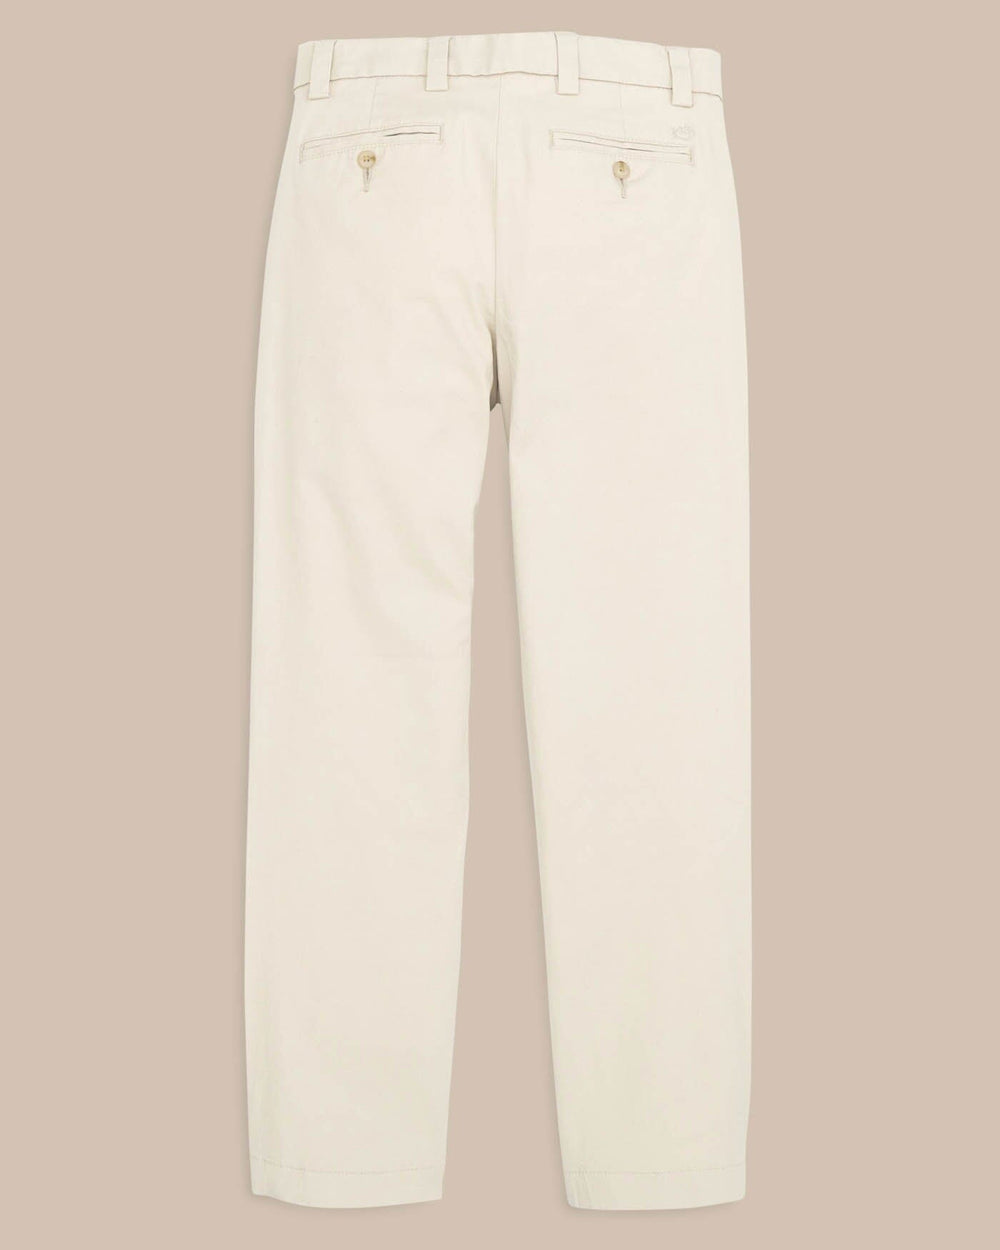 The back view of the Boys Channel Marker Pant by Southern Tide - Light Khaki